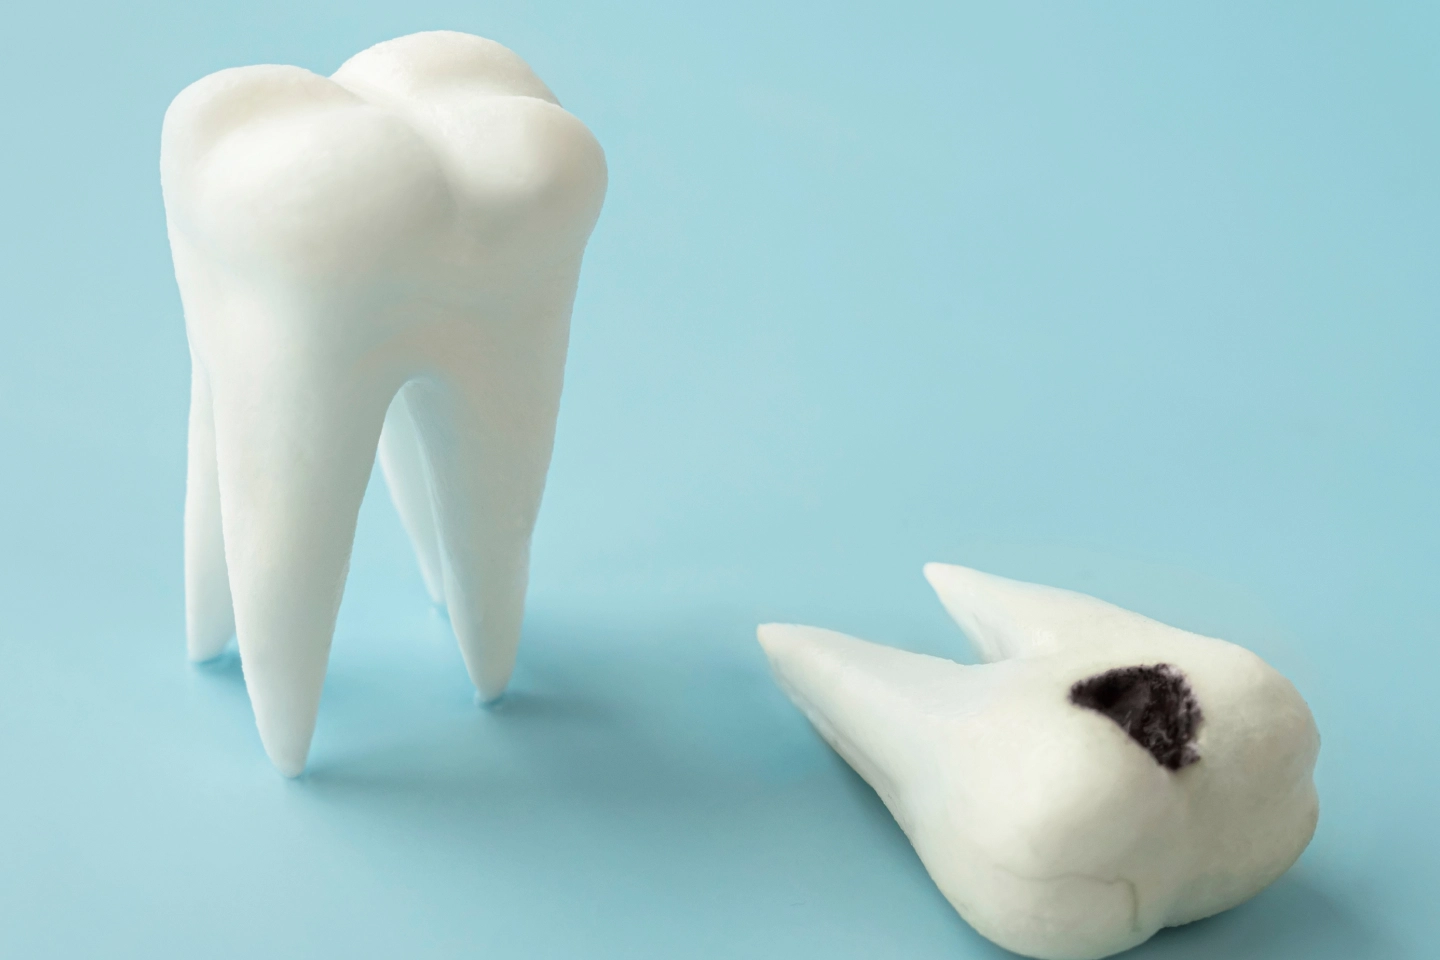 Dental Caries: Complications And Treatment